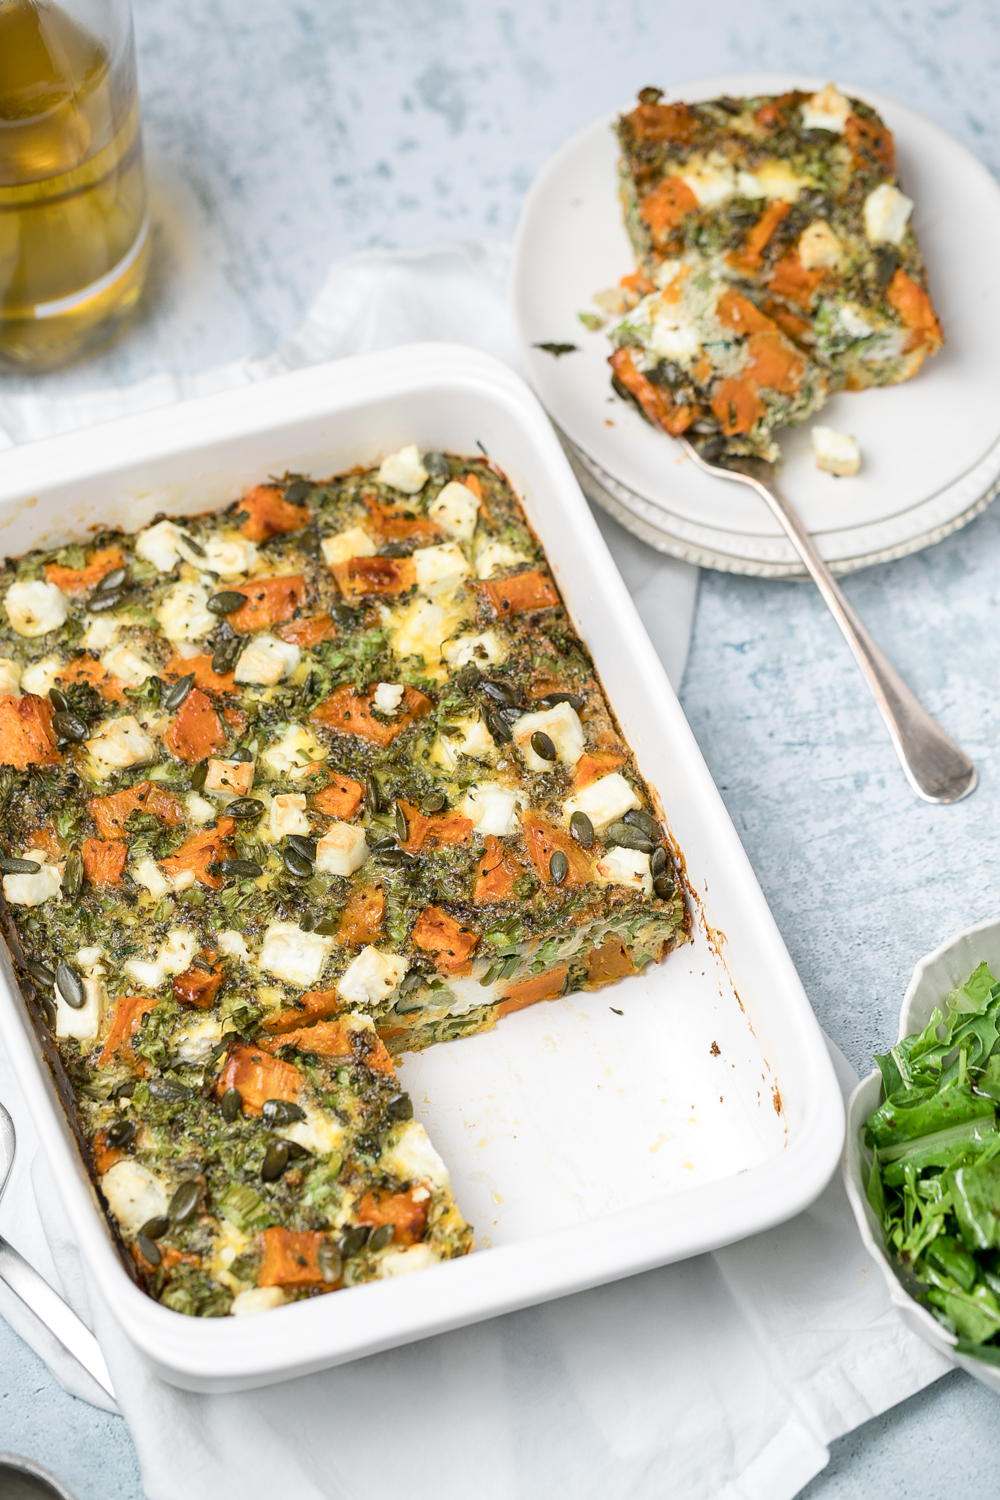 White rectangular baking dish with frittata with feta, sweet potato, broccoli and pumpkin seeds, side plate